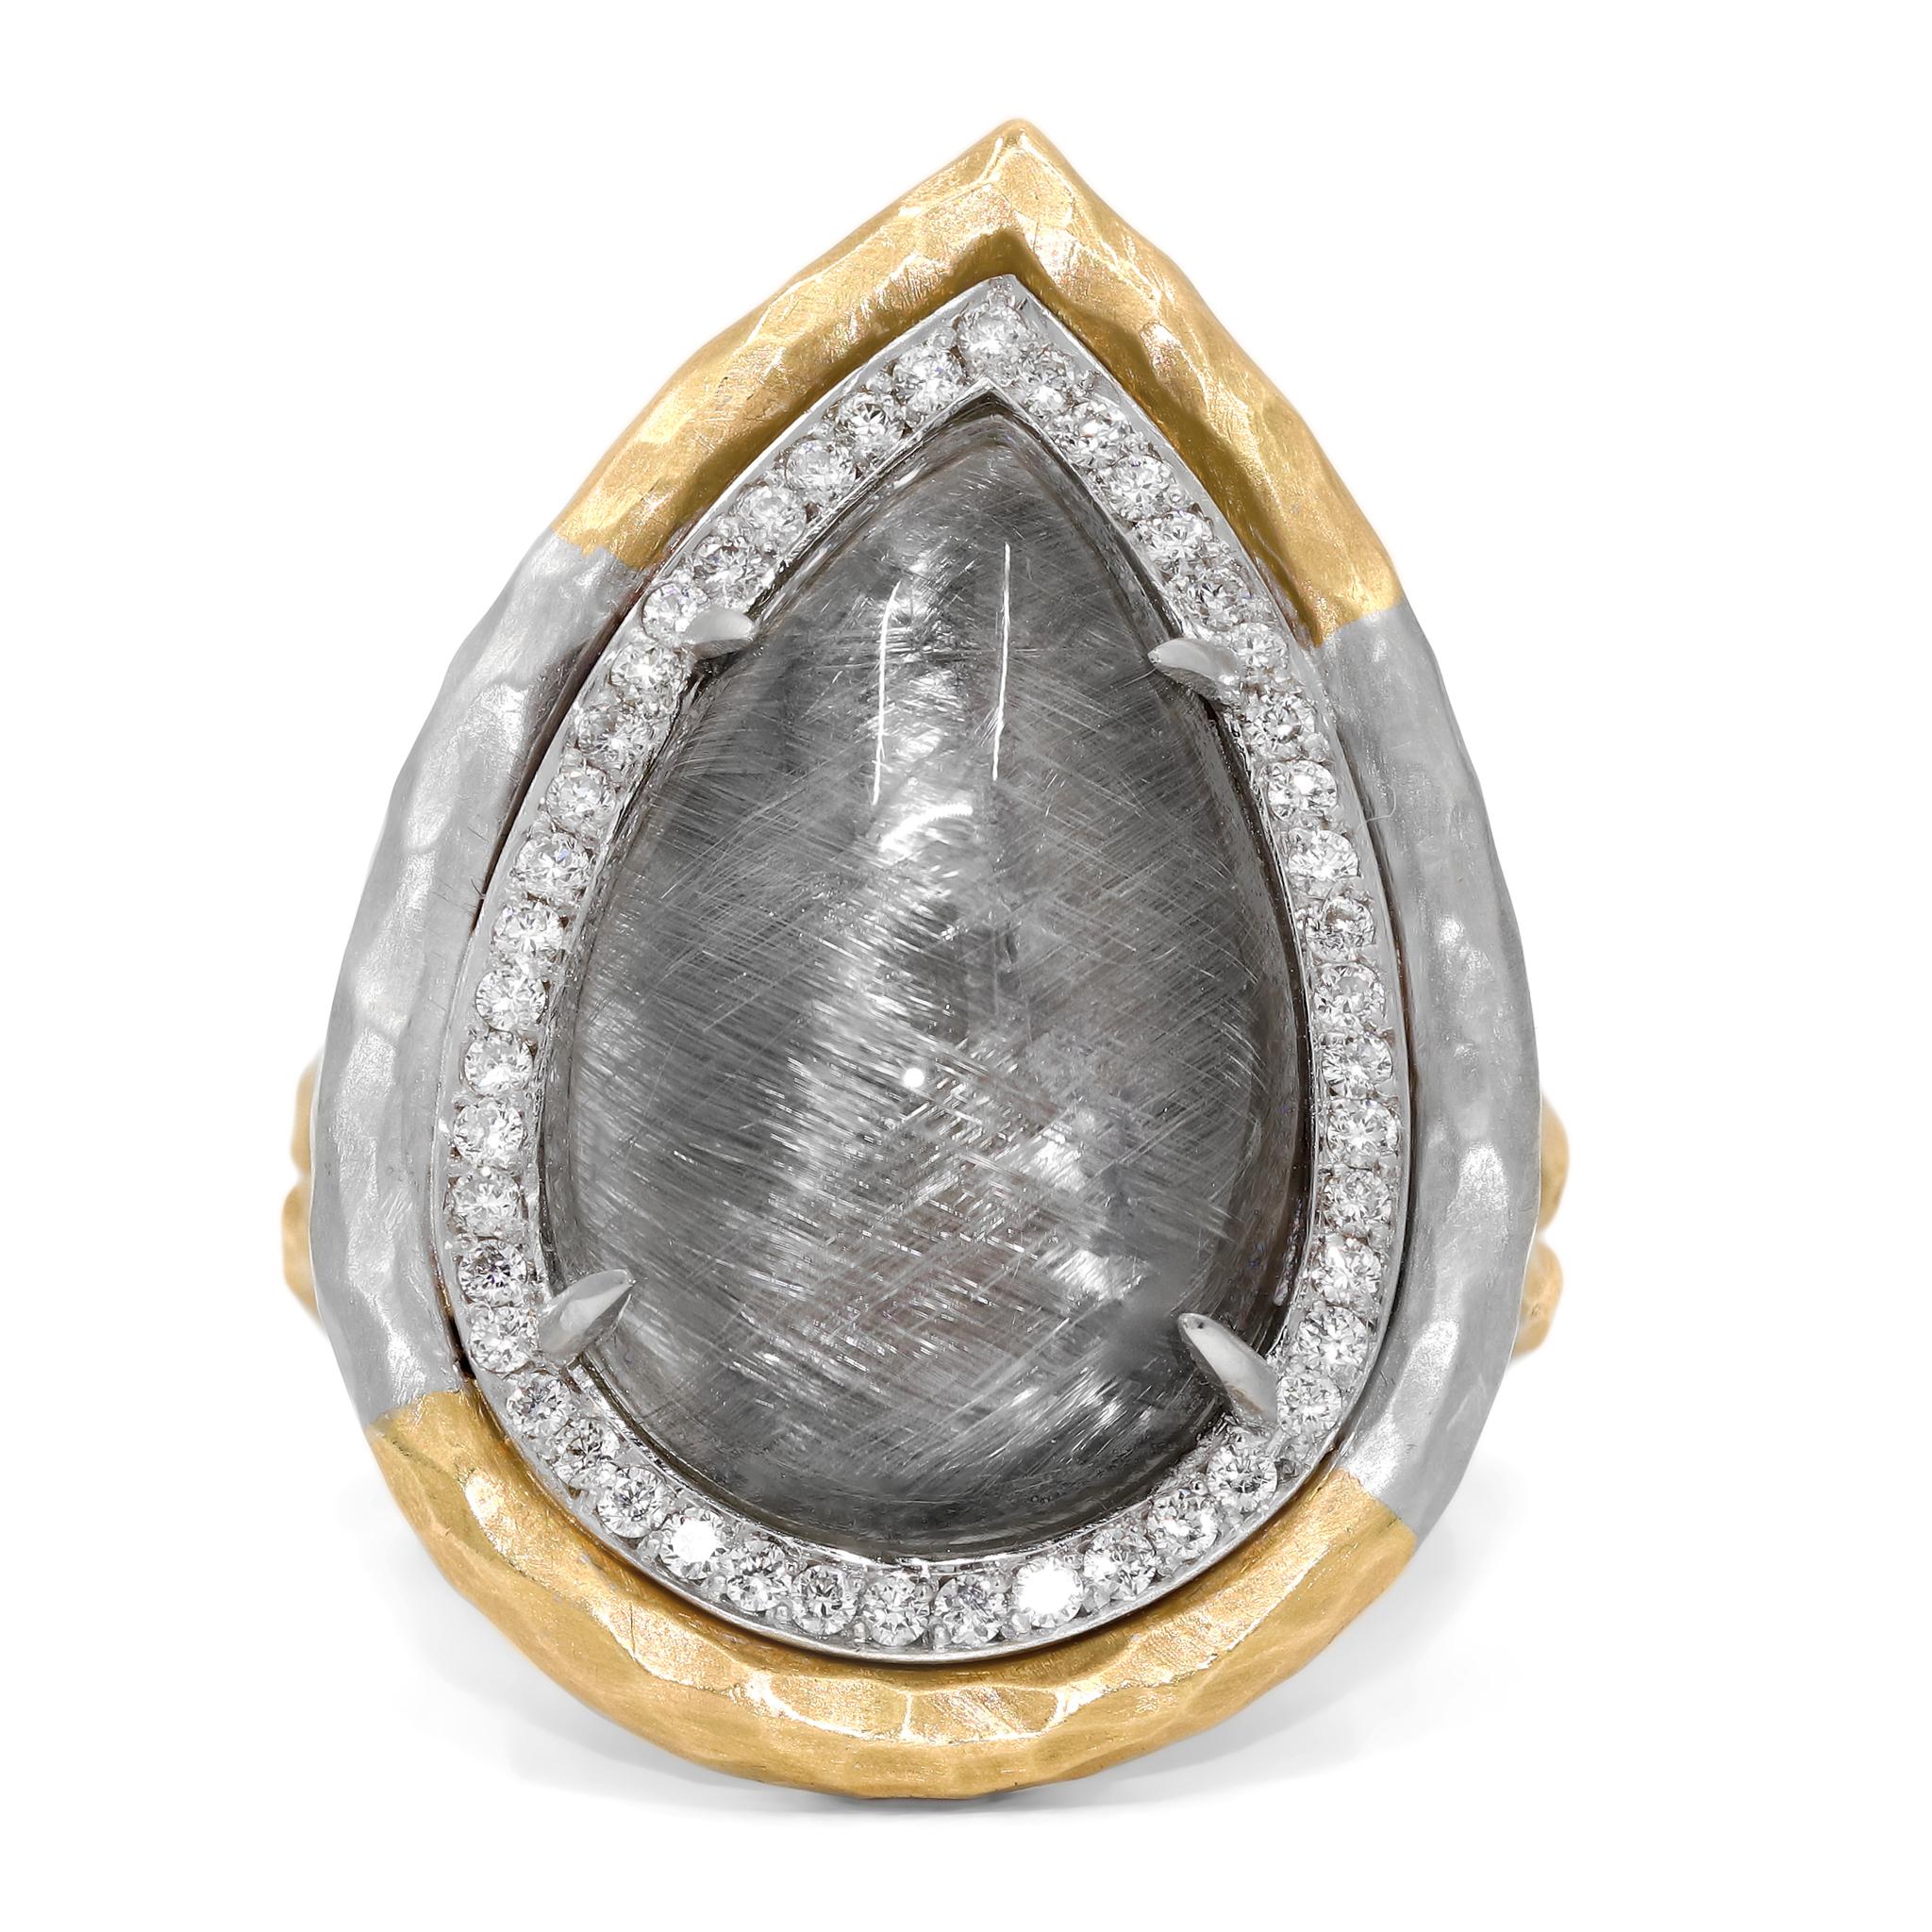 One-of-a-Kind Empress Ring hand-fabricated by award-winning jewelry designer Pamela Froman in her signature 